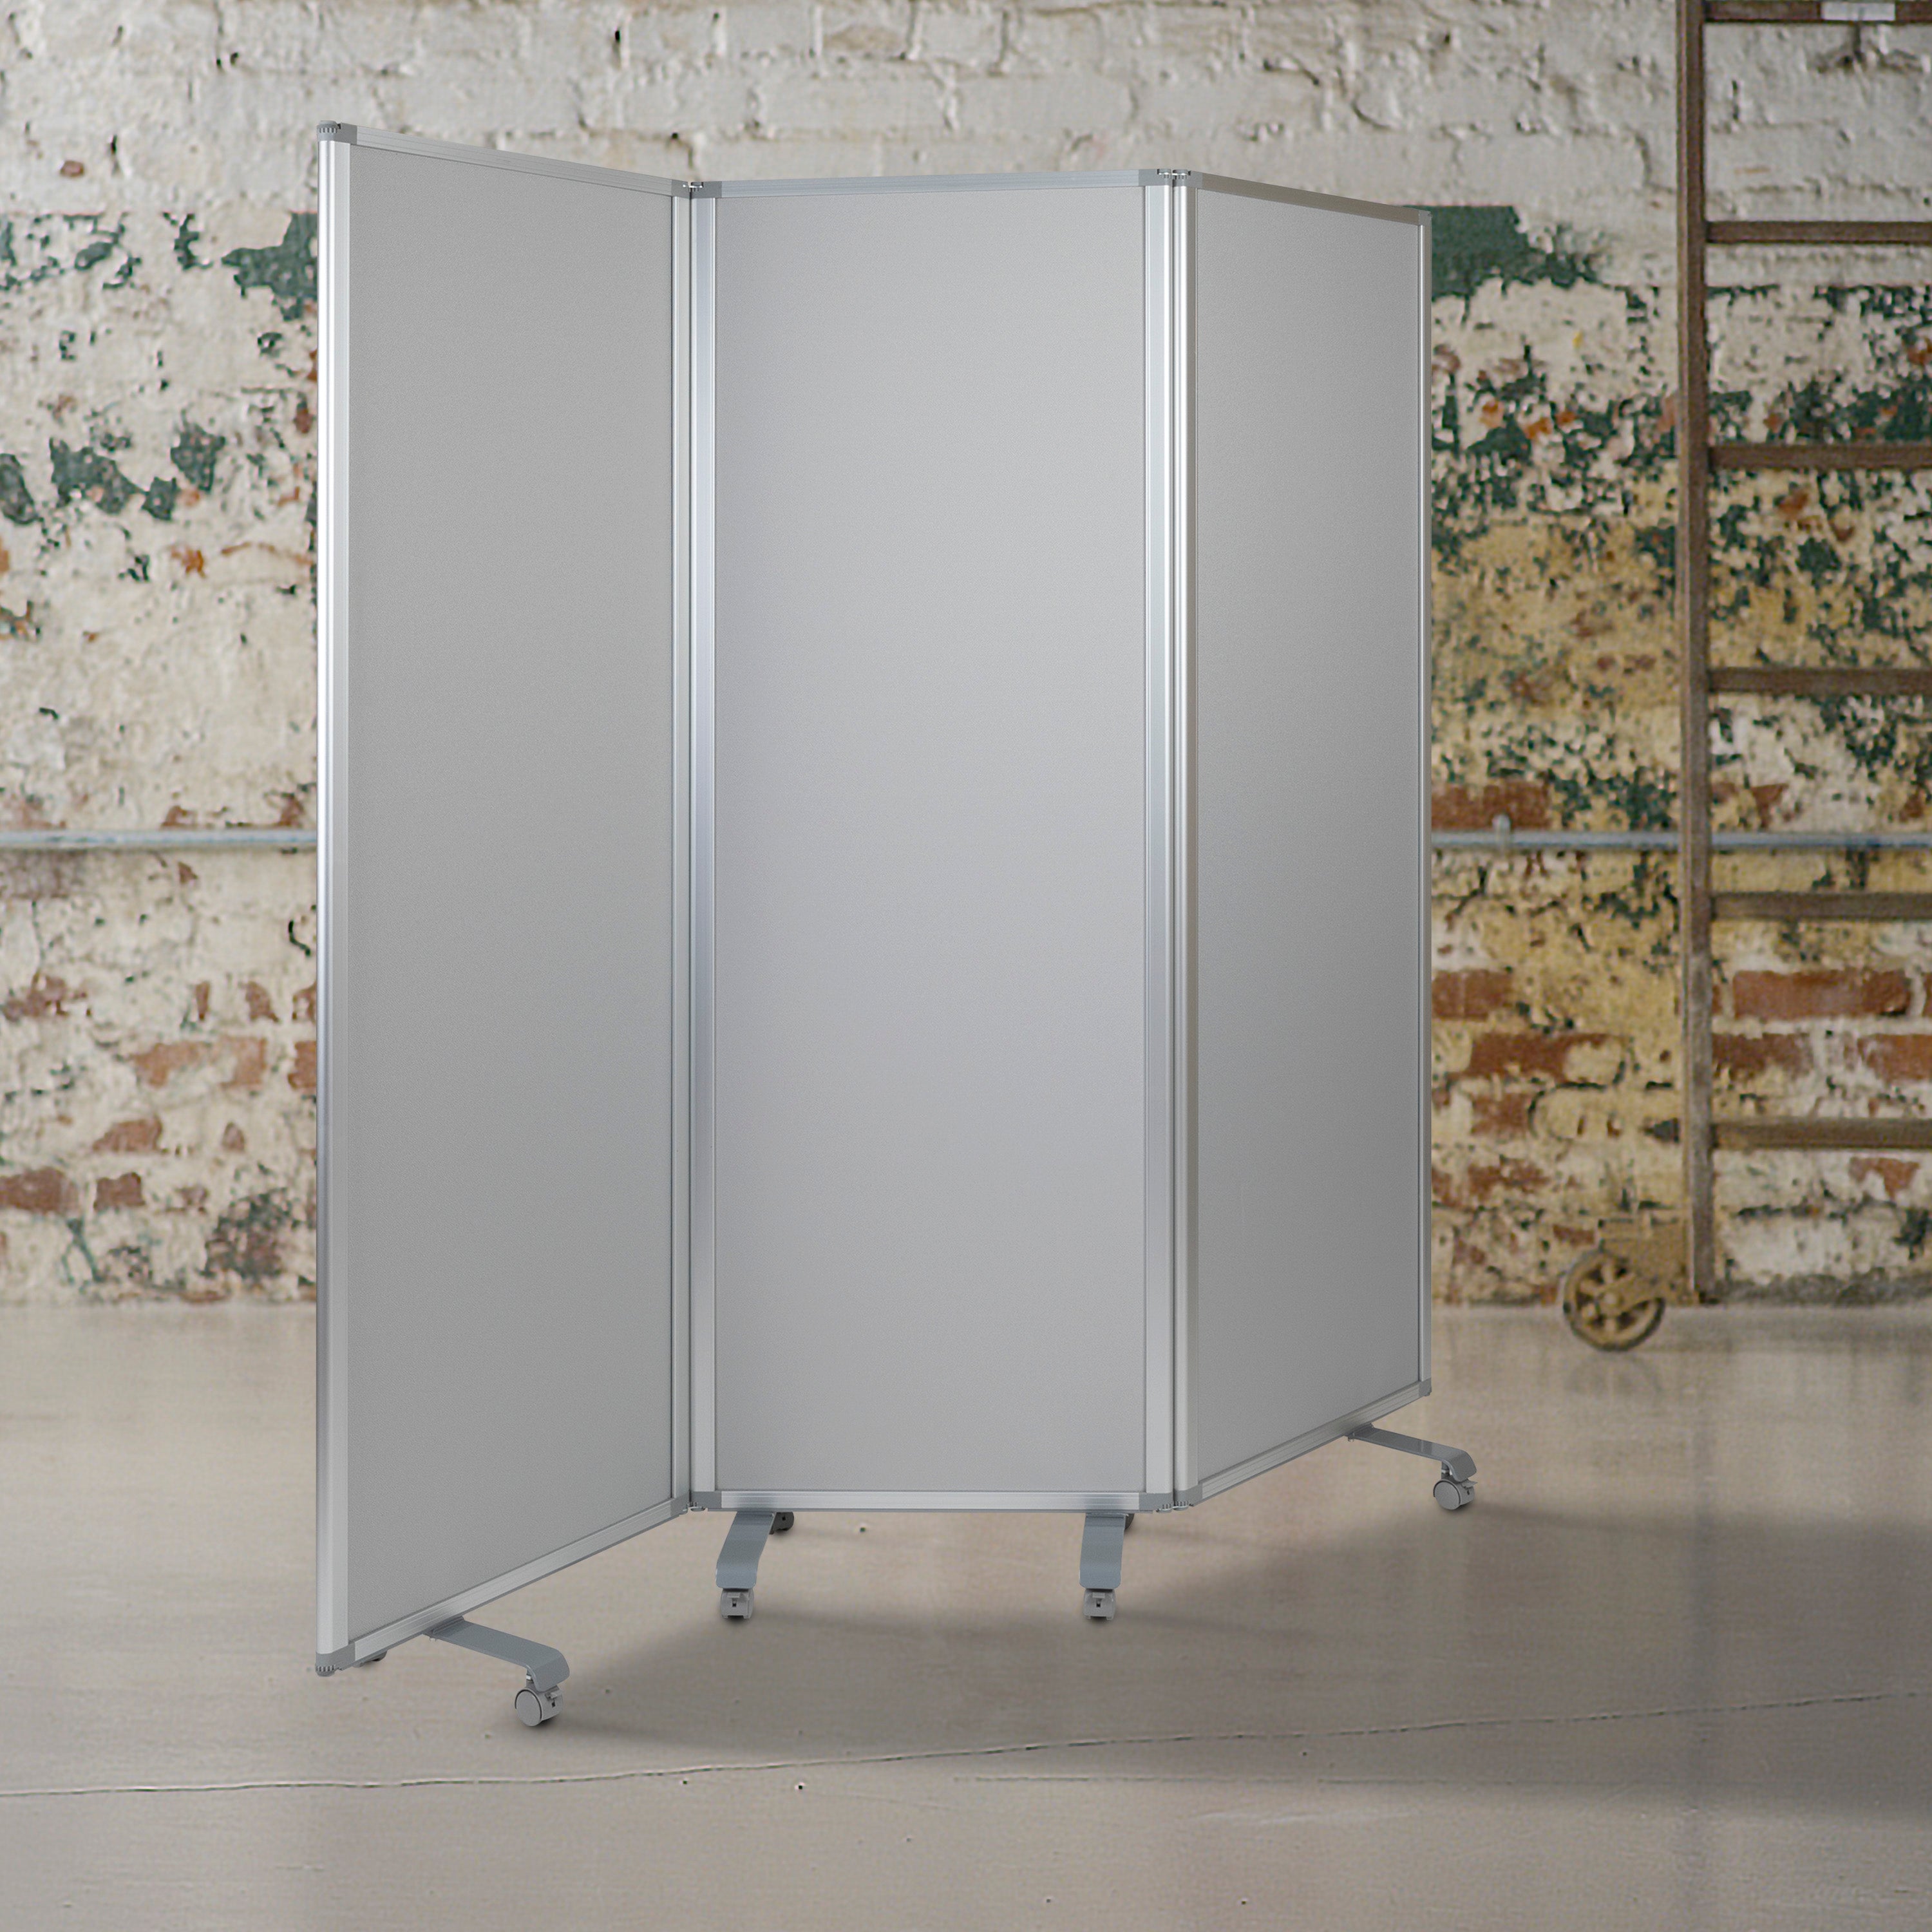 Double Sided Mobile Magnetic Whiteboard/Cloth Partition with Lockable Casters, 72"H x 24"W (3 sections included)-Mobile Whiteboard Partitions-Flash Furniture-Wall2Wall Furnishings